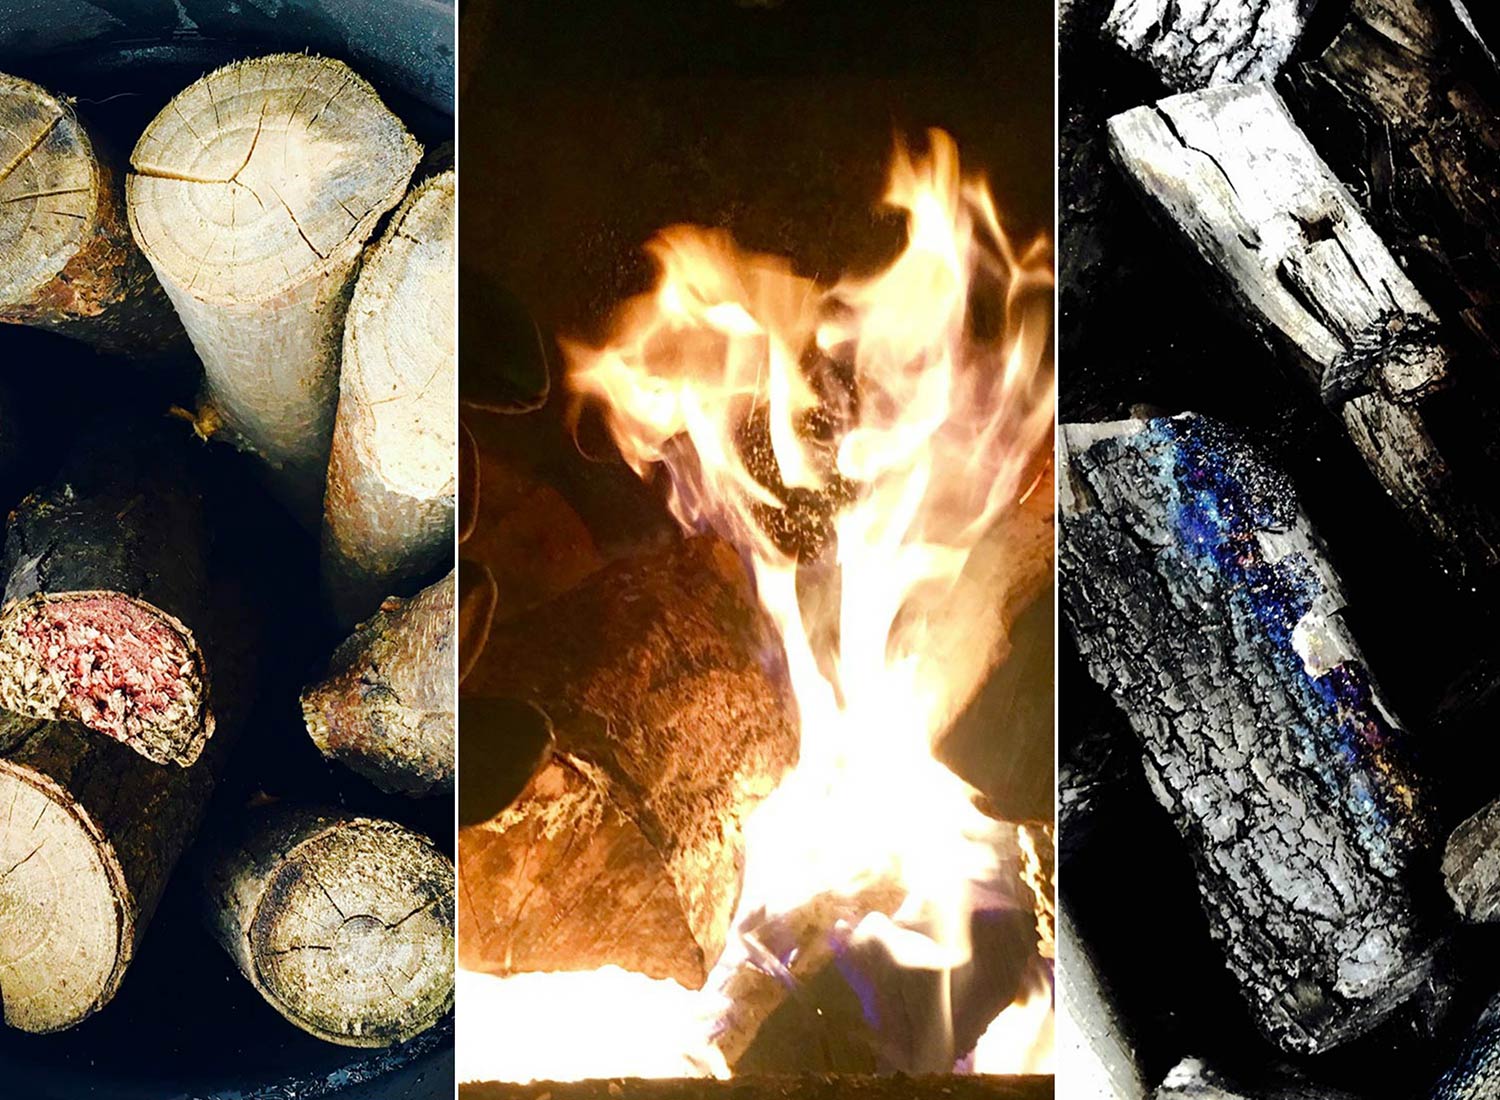 Food Lab at SHO: vegan gastronomy in a cold climate | making homemade wood charcoal - custom-made, high-heat resistant metal container filled with hardwood logs spends a day in our tarm-wood-fired boilers and converts to wood charcoal used for special food lab projects